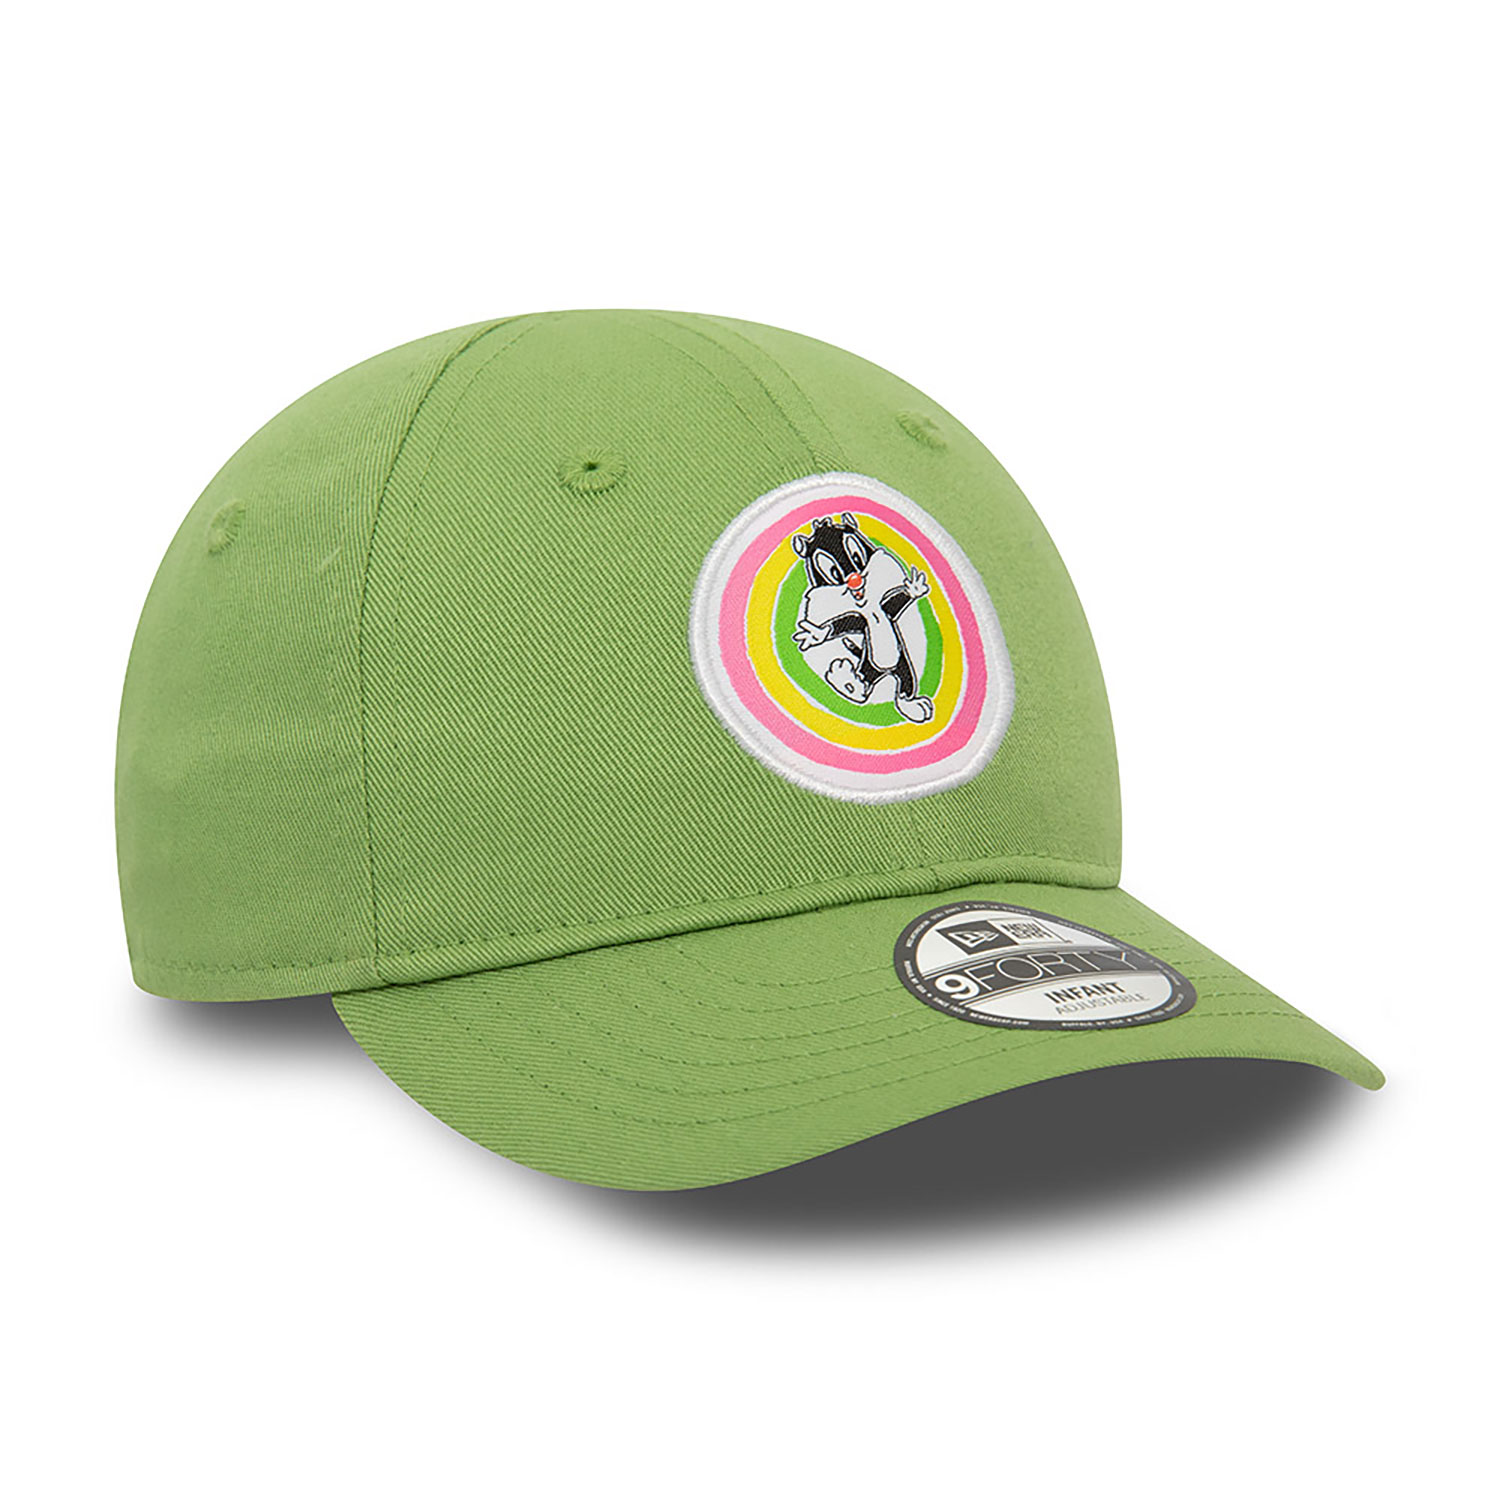 Sylvester Infant Looney Tunes Pastel Green 9FORTY Adjustable Cap